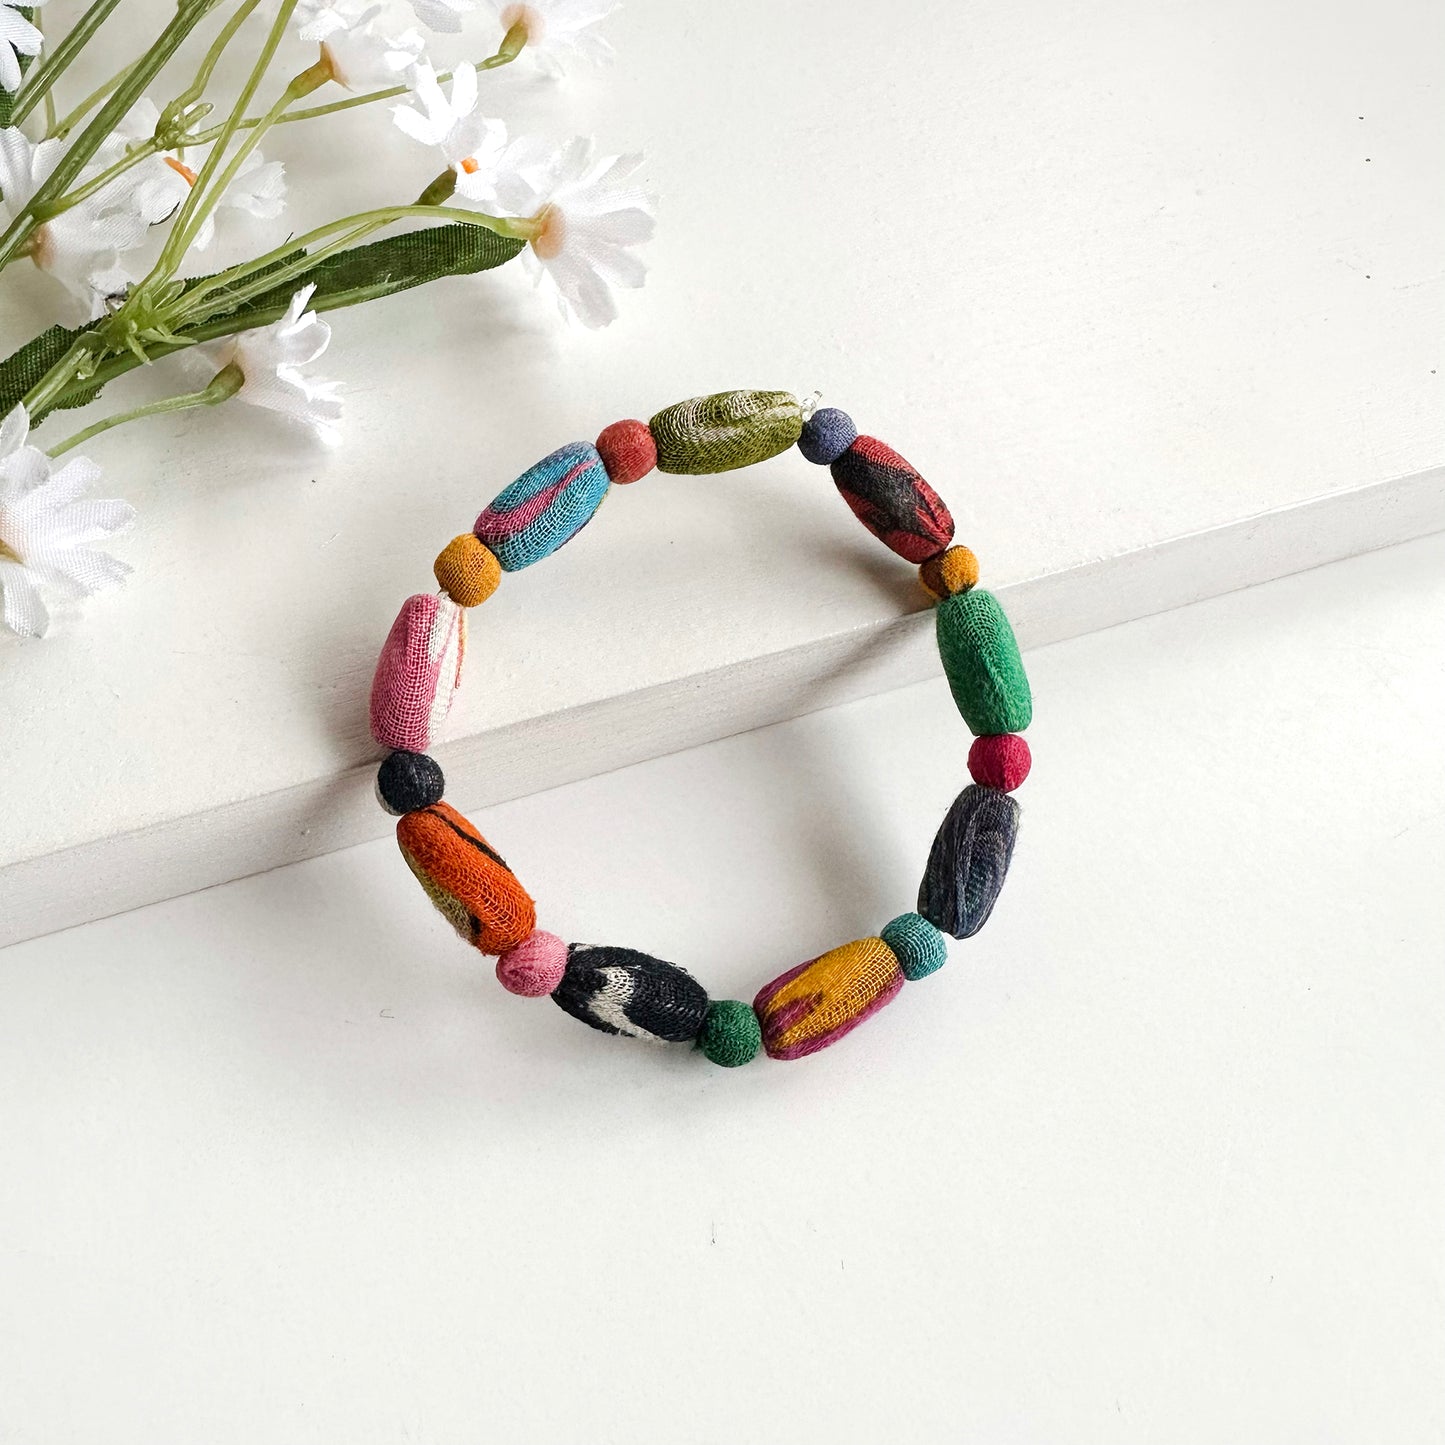 A single-strand bracelet is shown, formed with alternating round and elongated Kantha beads.